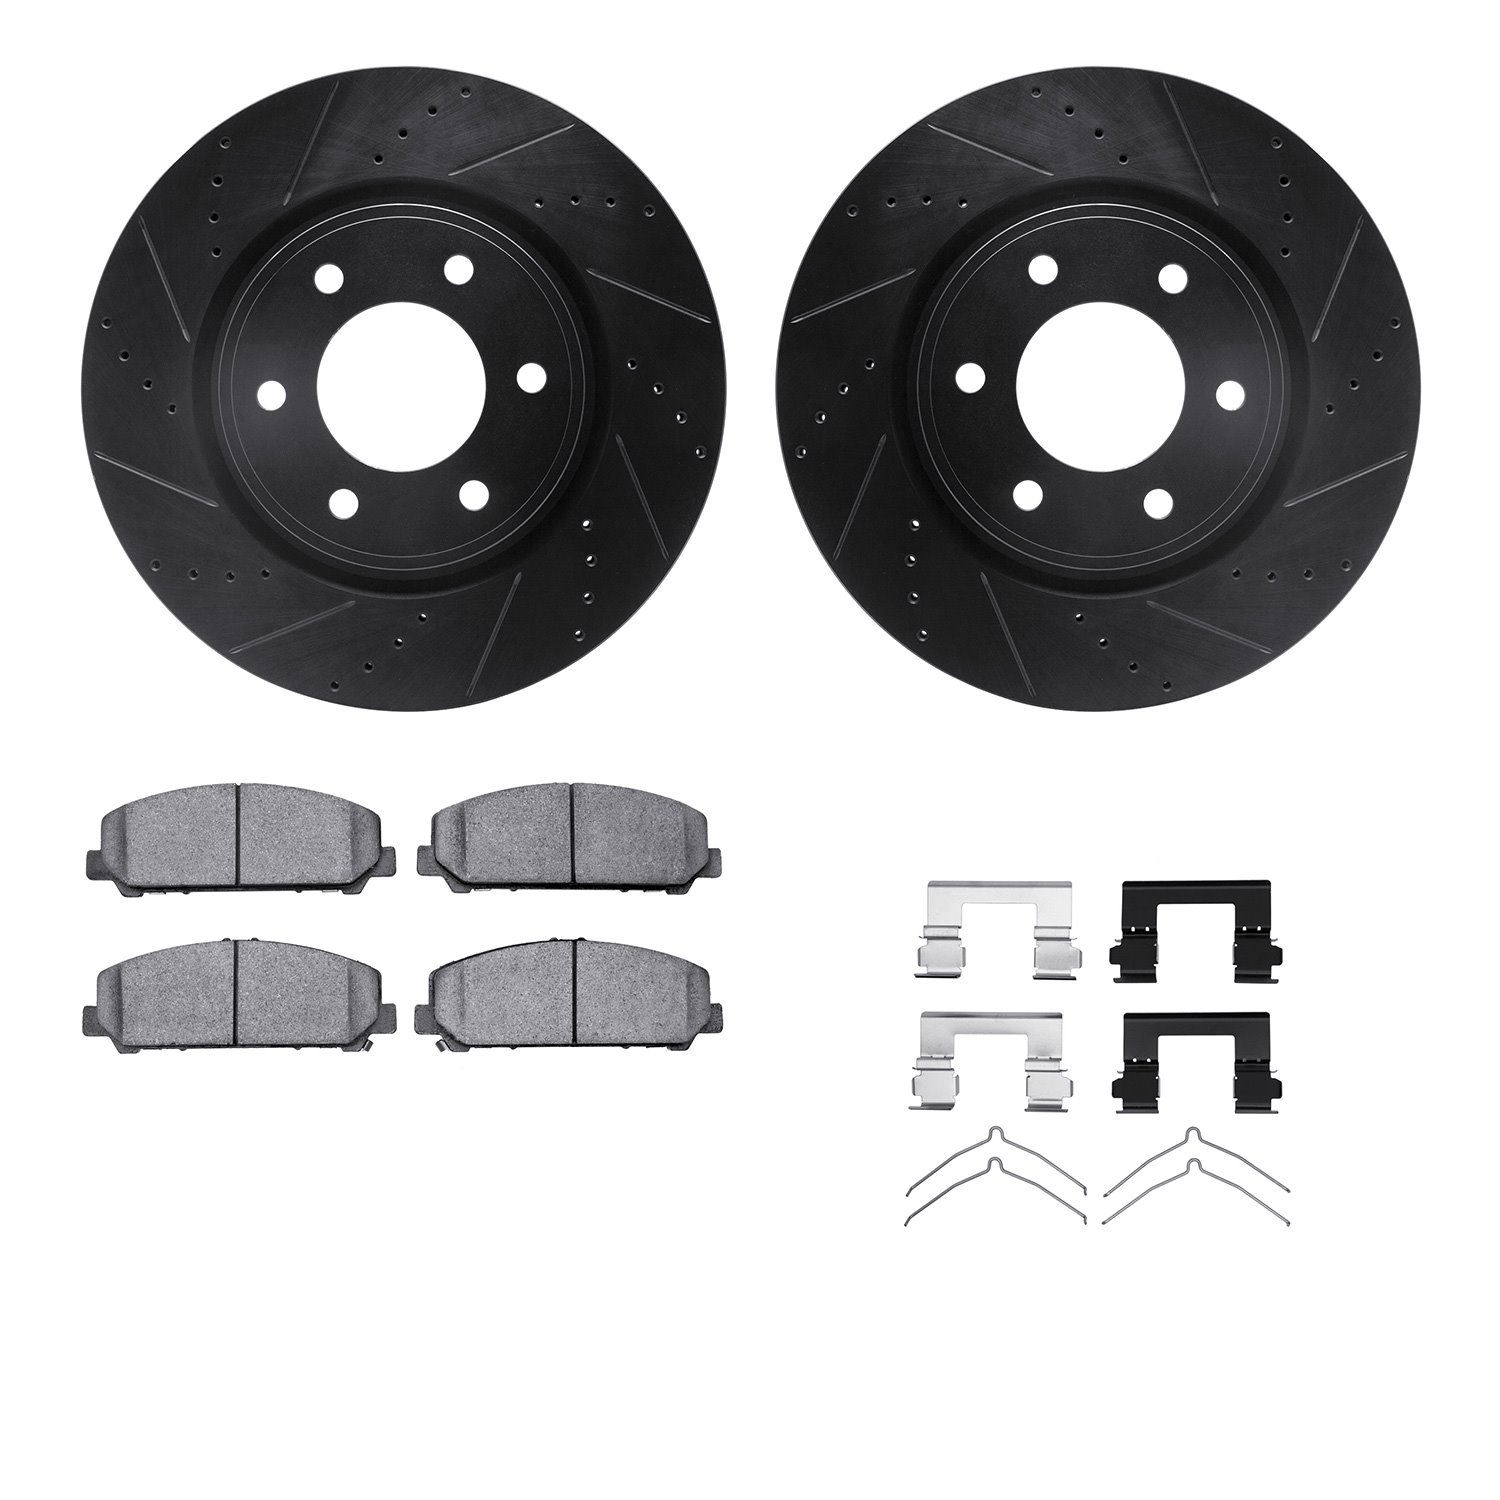 8412-68001 Drilled/Slotted Brake Rotors with Ultimate-Duty Brake Pads Kit & Hardware [Black], Fits Select Infiniti/Nissan, Posit